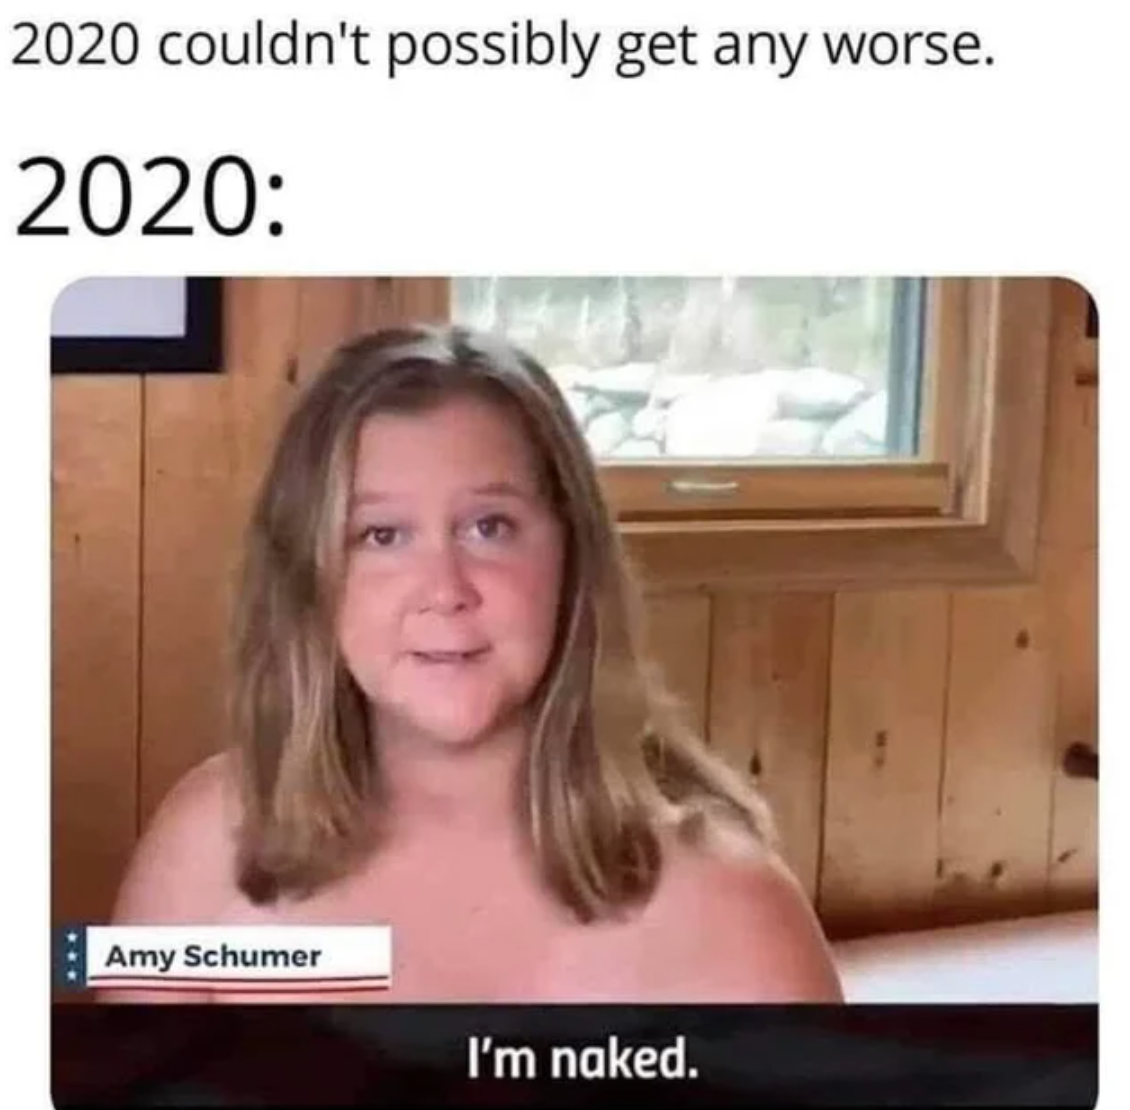 NowThis News - 2020 couldn't possibly get any worse. 2020 Amy Schumer I'm naked.